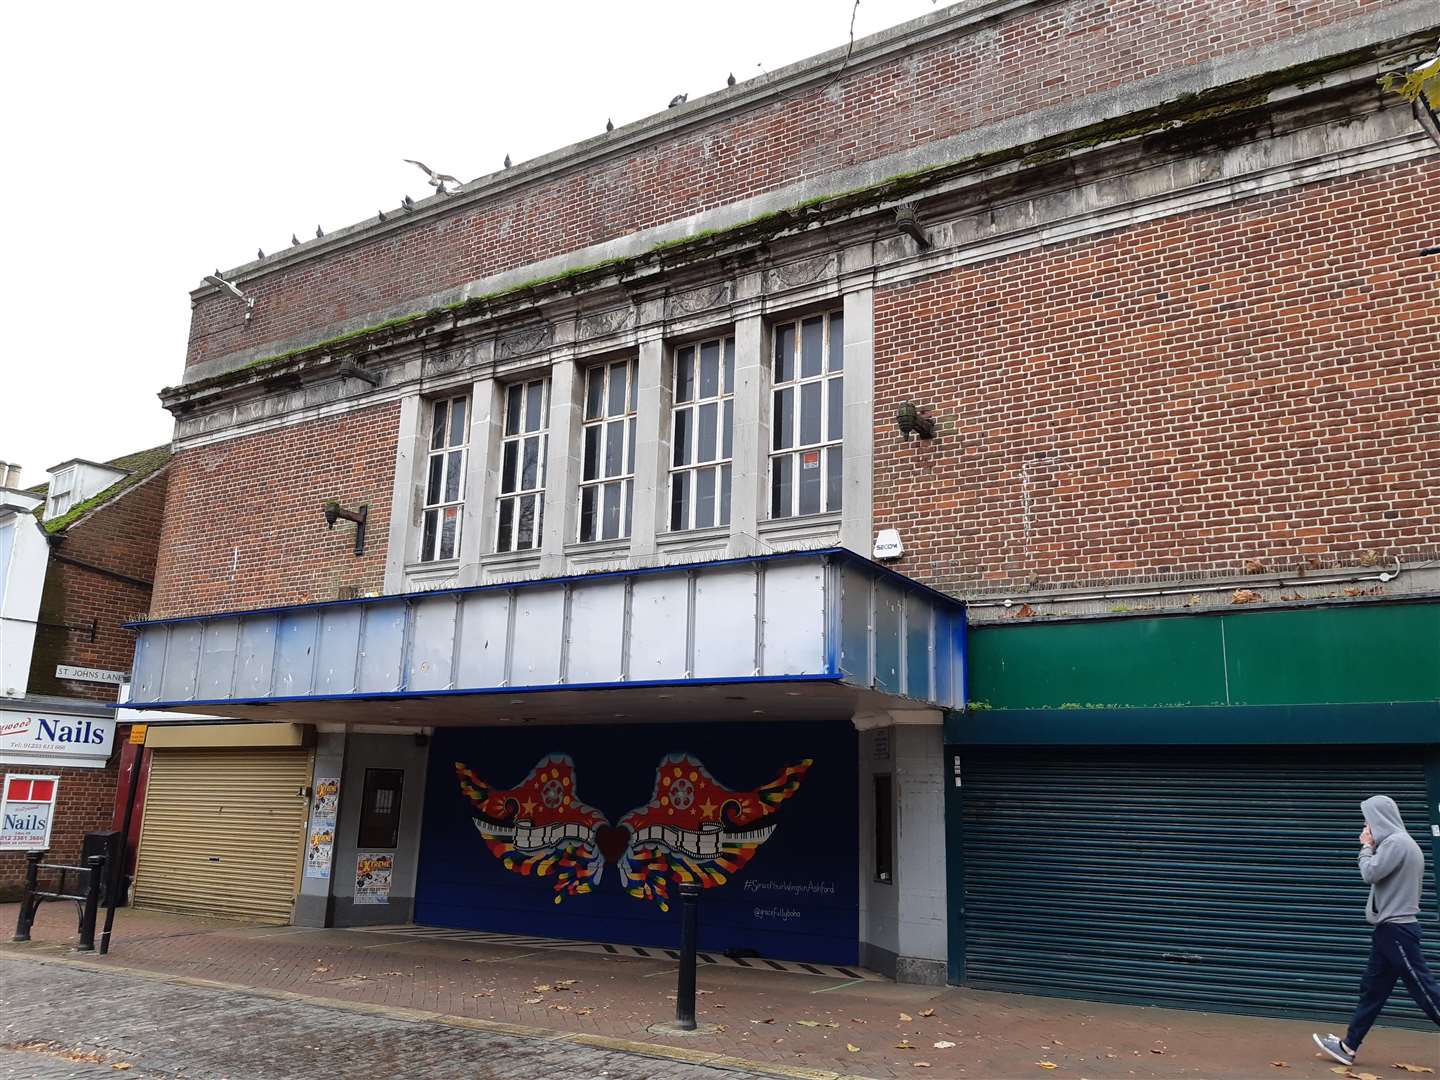 The former Mecca Bingo building in the Lower High Street